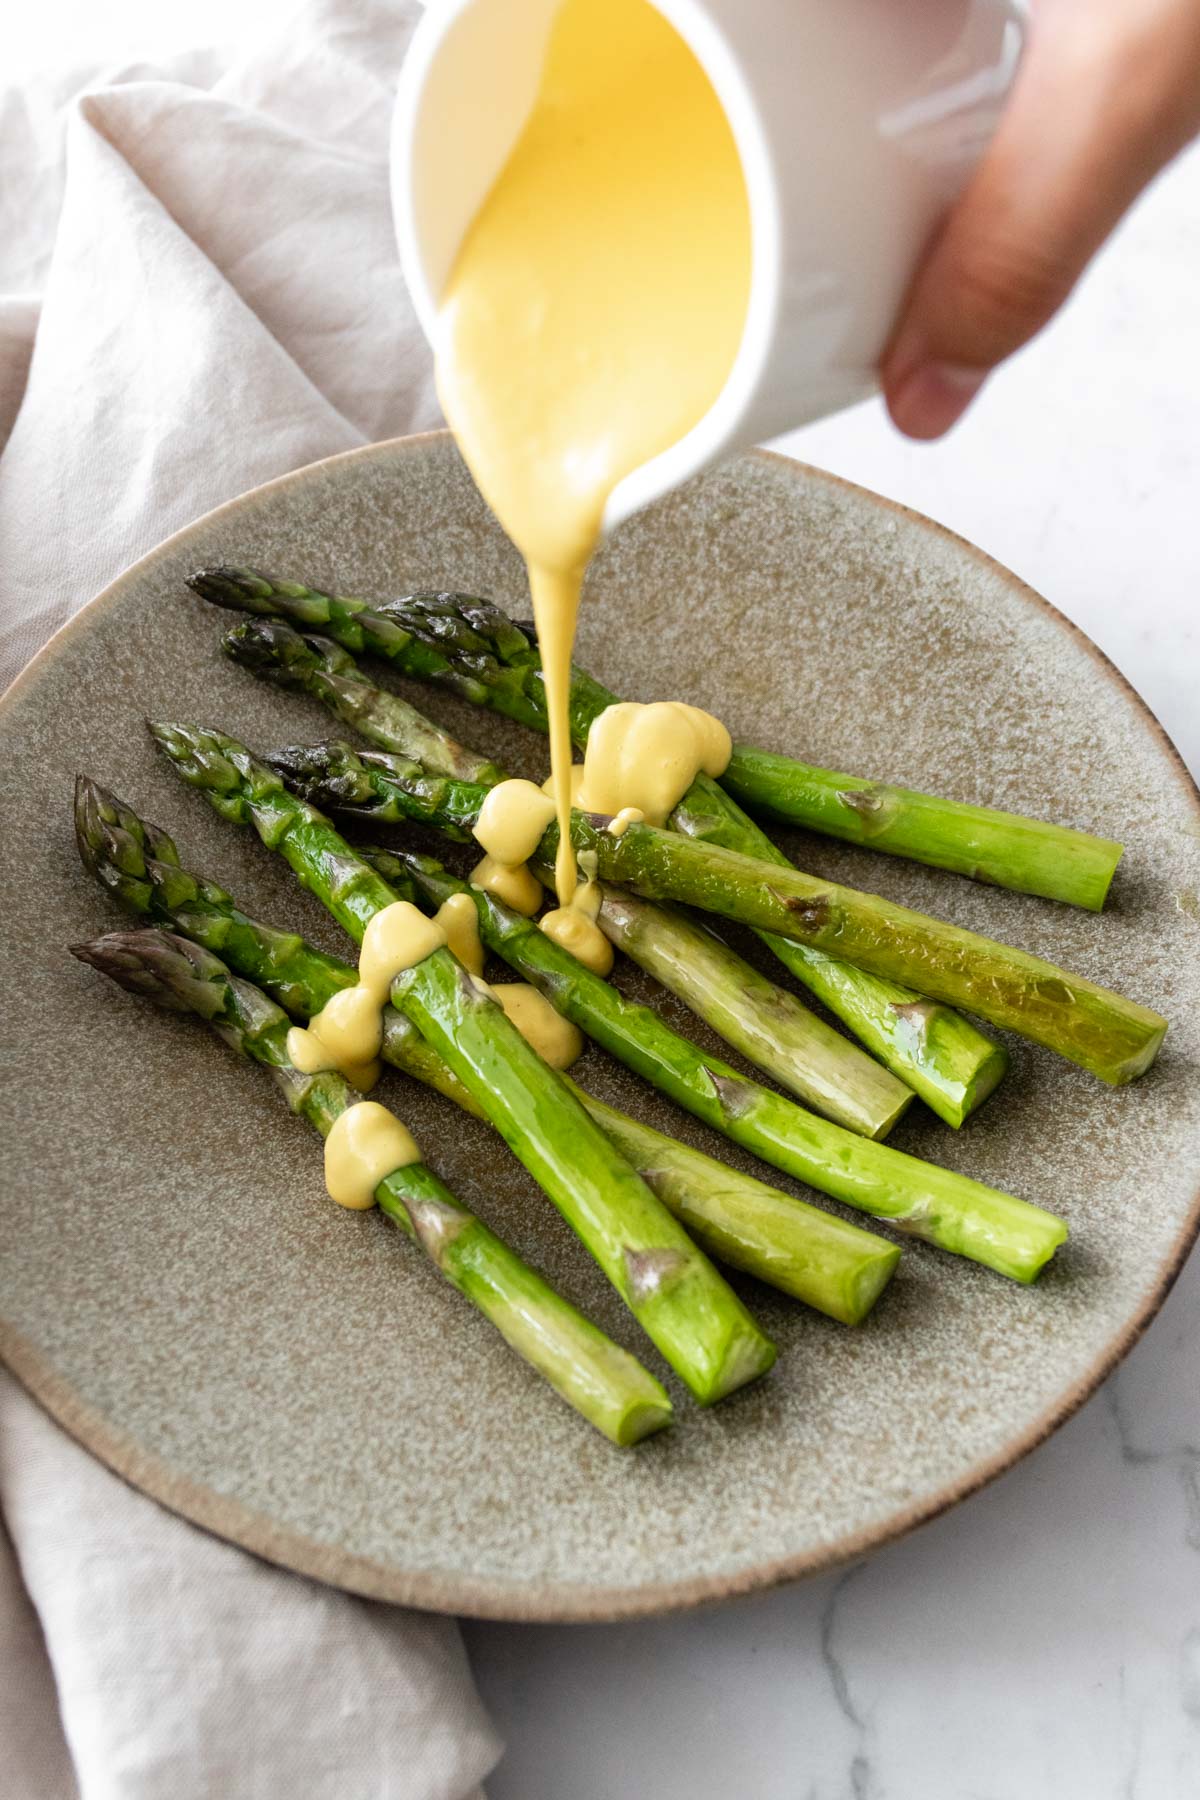 a plate with asparagus and a hand pouring Hollandaise sauce over the asparagus